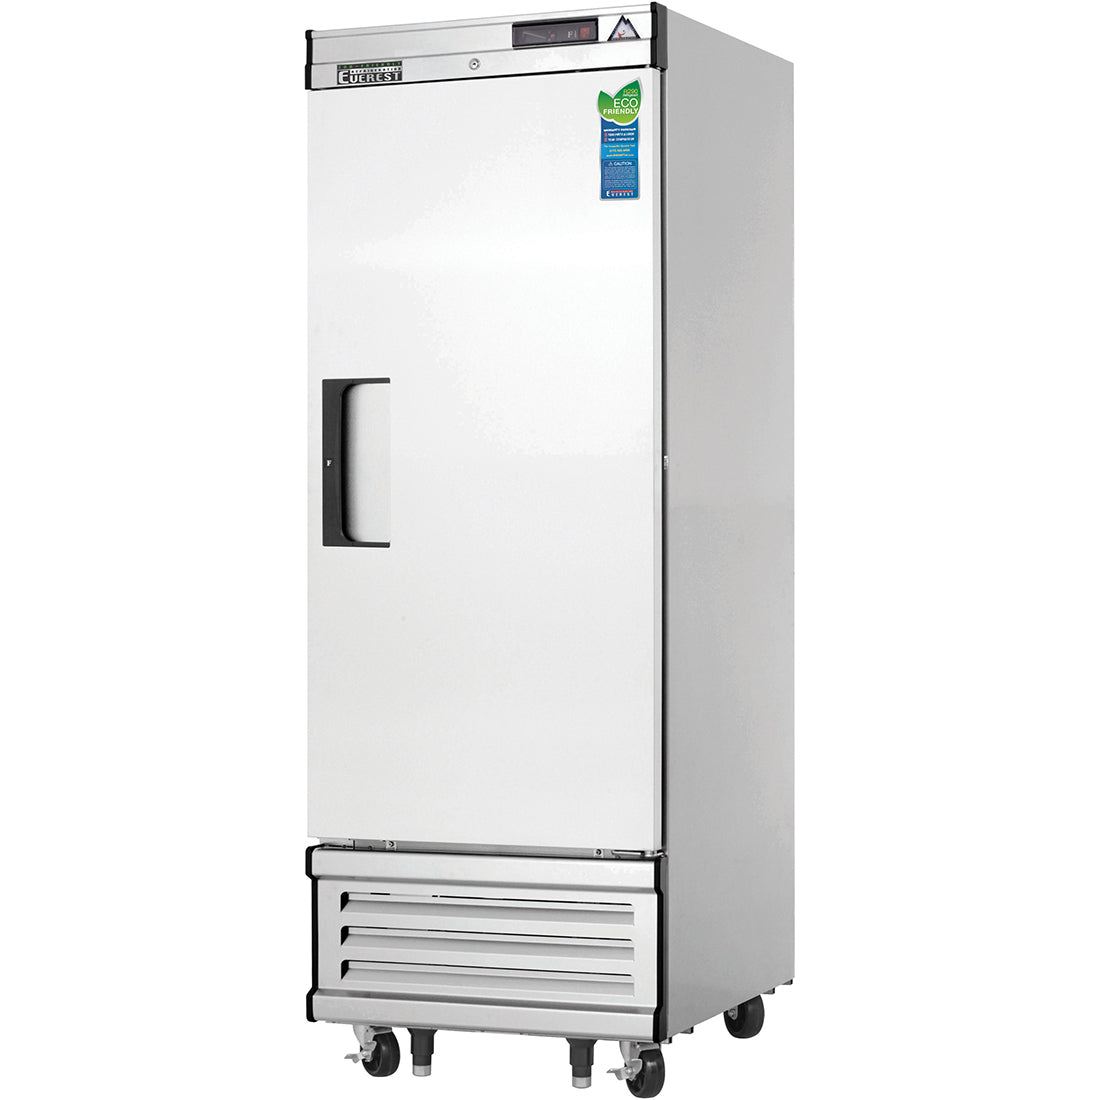 Everest EB Series-EBWF1 One Section Solid Door Upright Reach-In Freezer - 23 Cu. Ft.